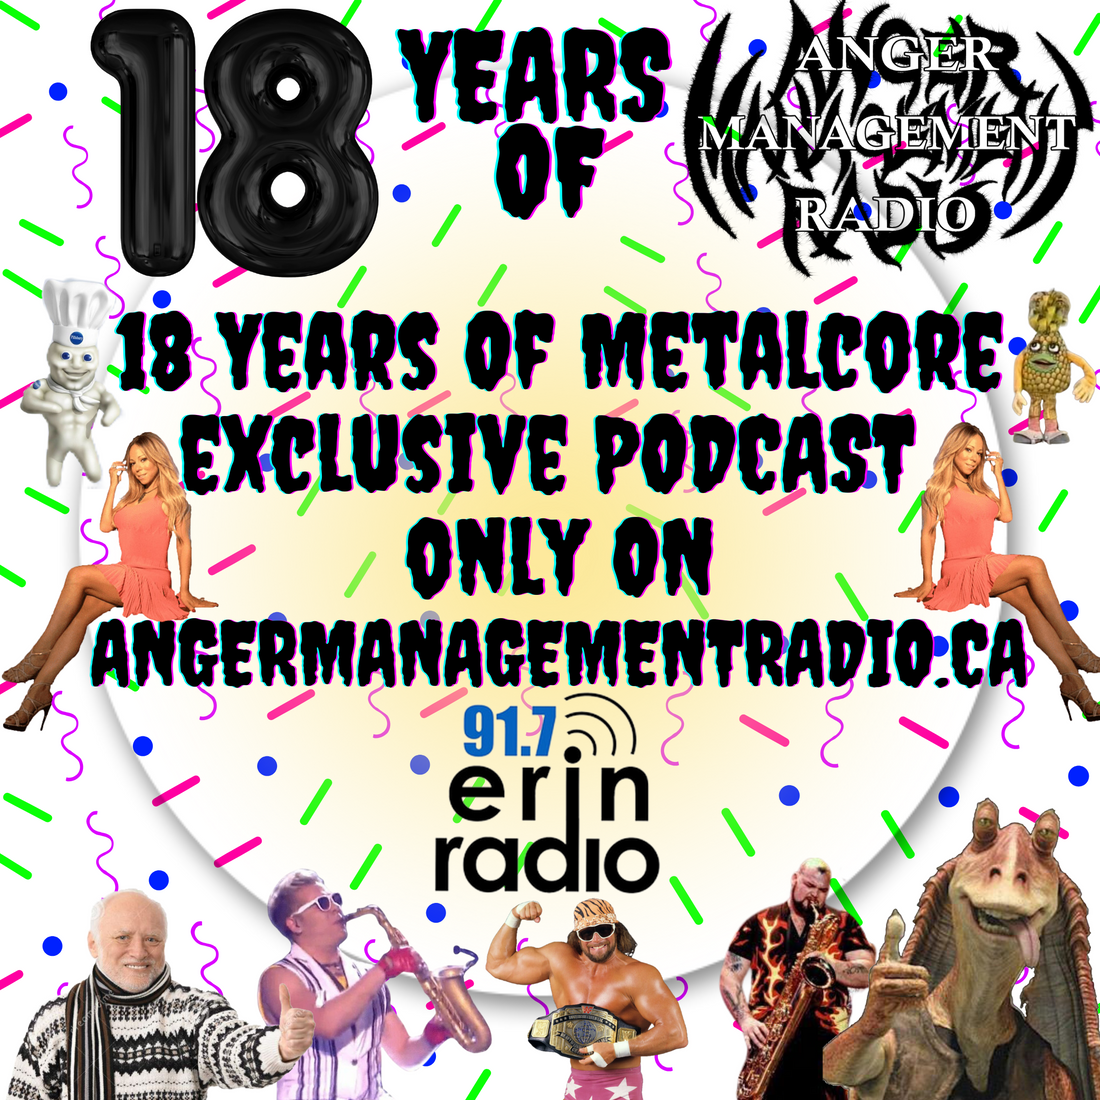 18 Years Of Anger Management Radio with Images of Mariah Carey, Saxophone Players and more party animals.